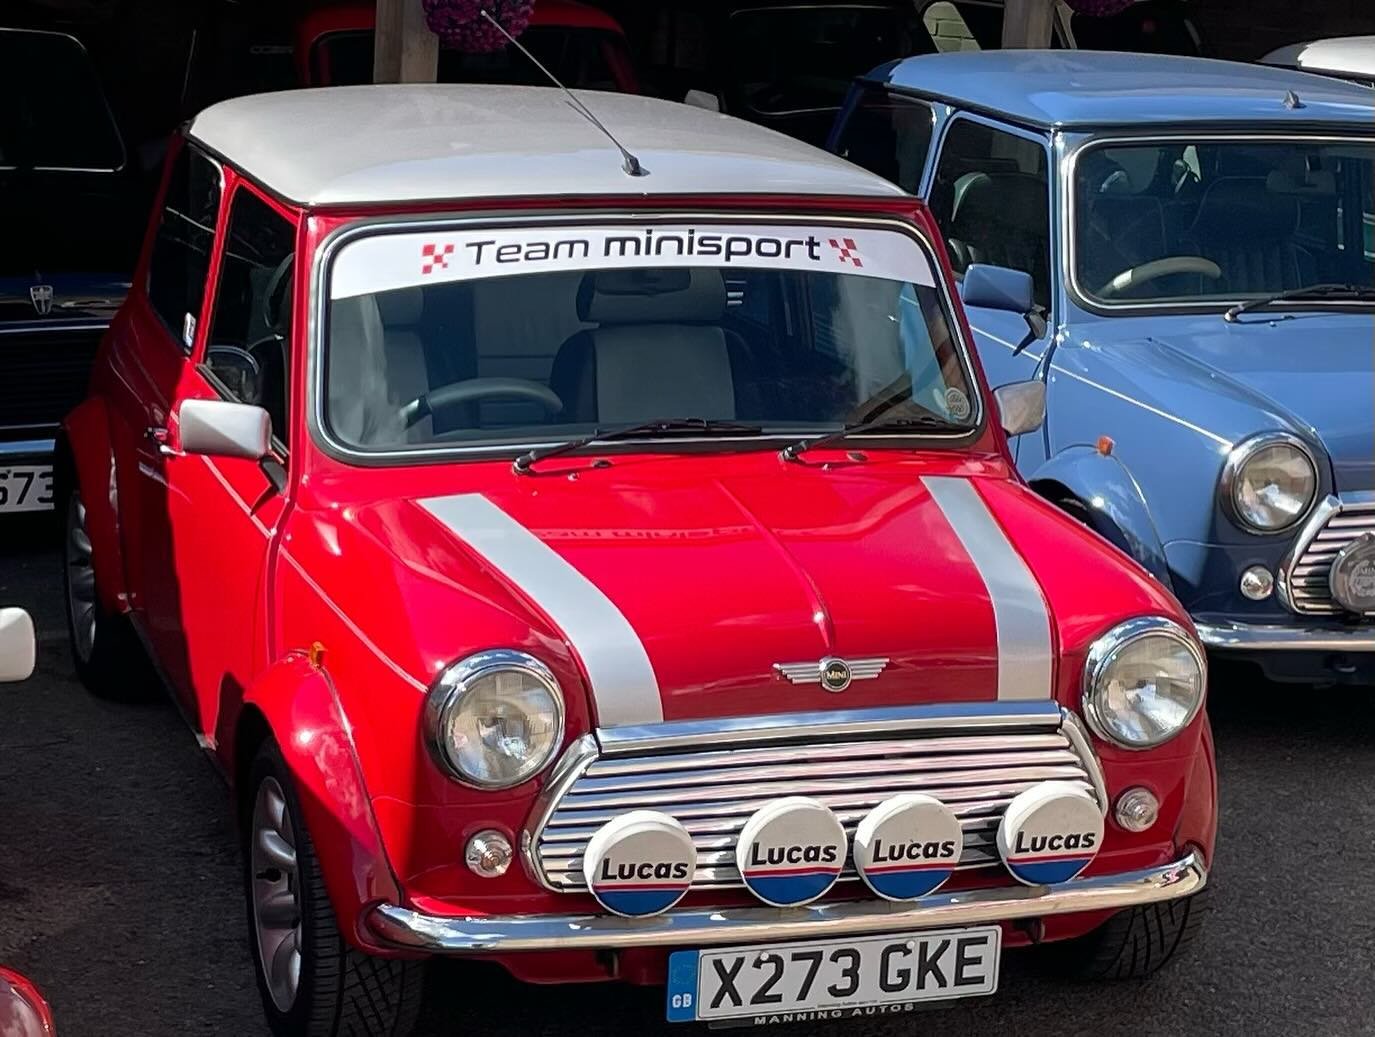 Customer feedback&hellip; ❤️

&ldquo;A big thank you to Dan and the team for sorting my Mini out recently [electrical problems]&hellip; also taking out the centre console &amp; adjusting the drivers seat makes for a much better driving experience 👍 